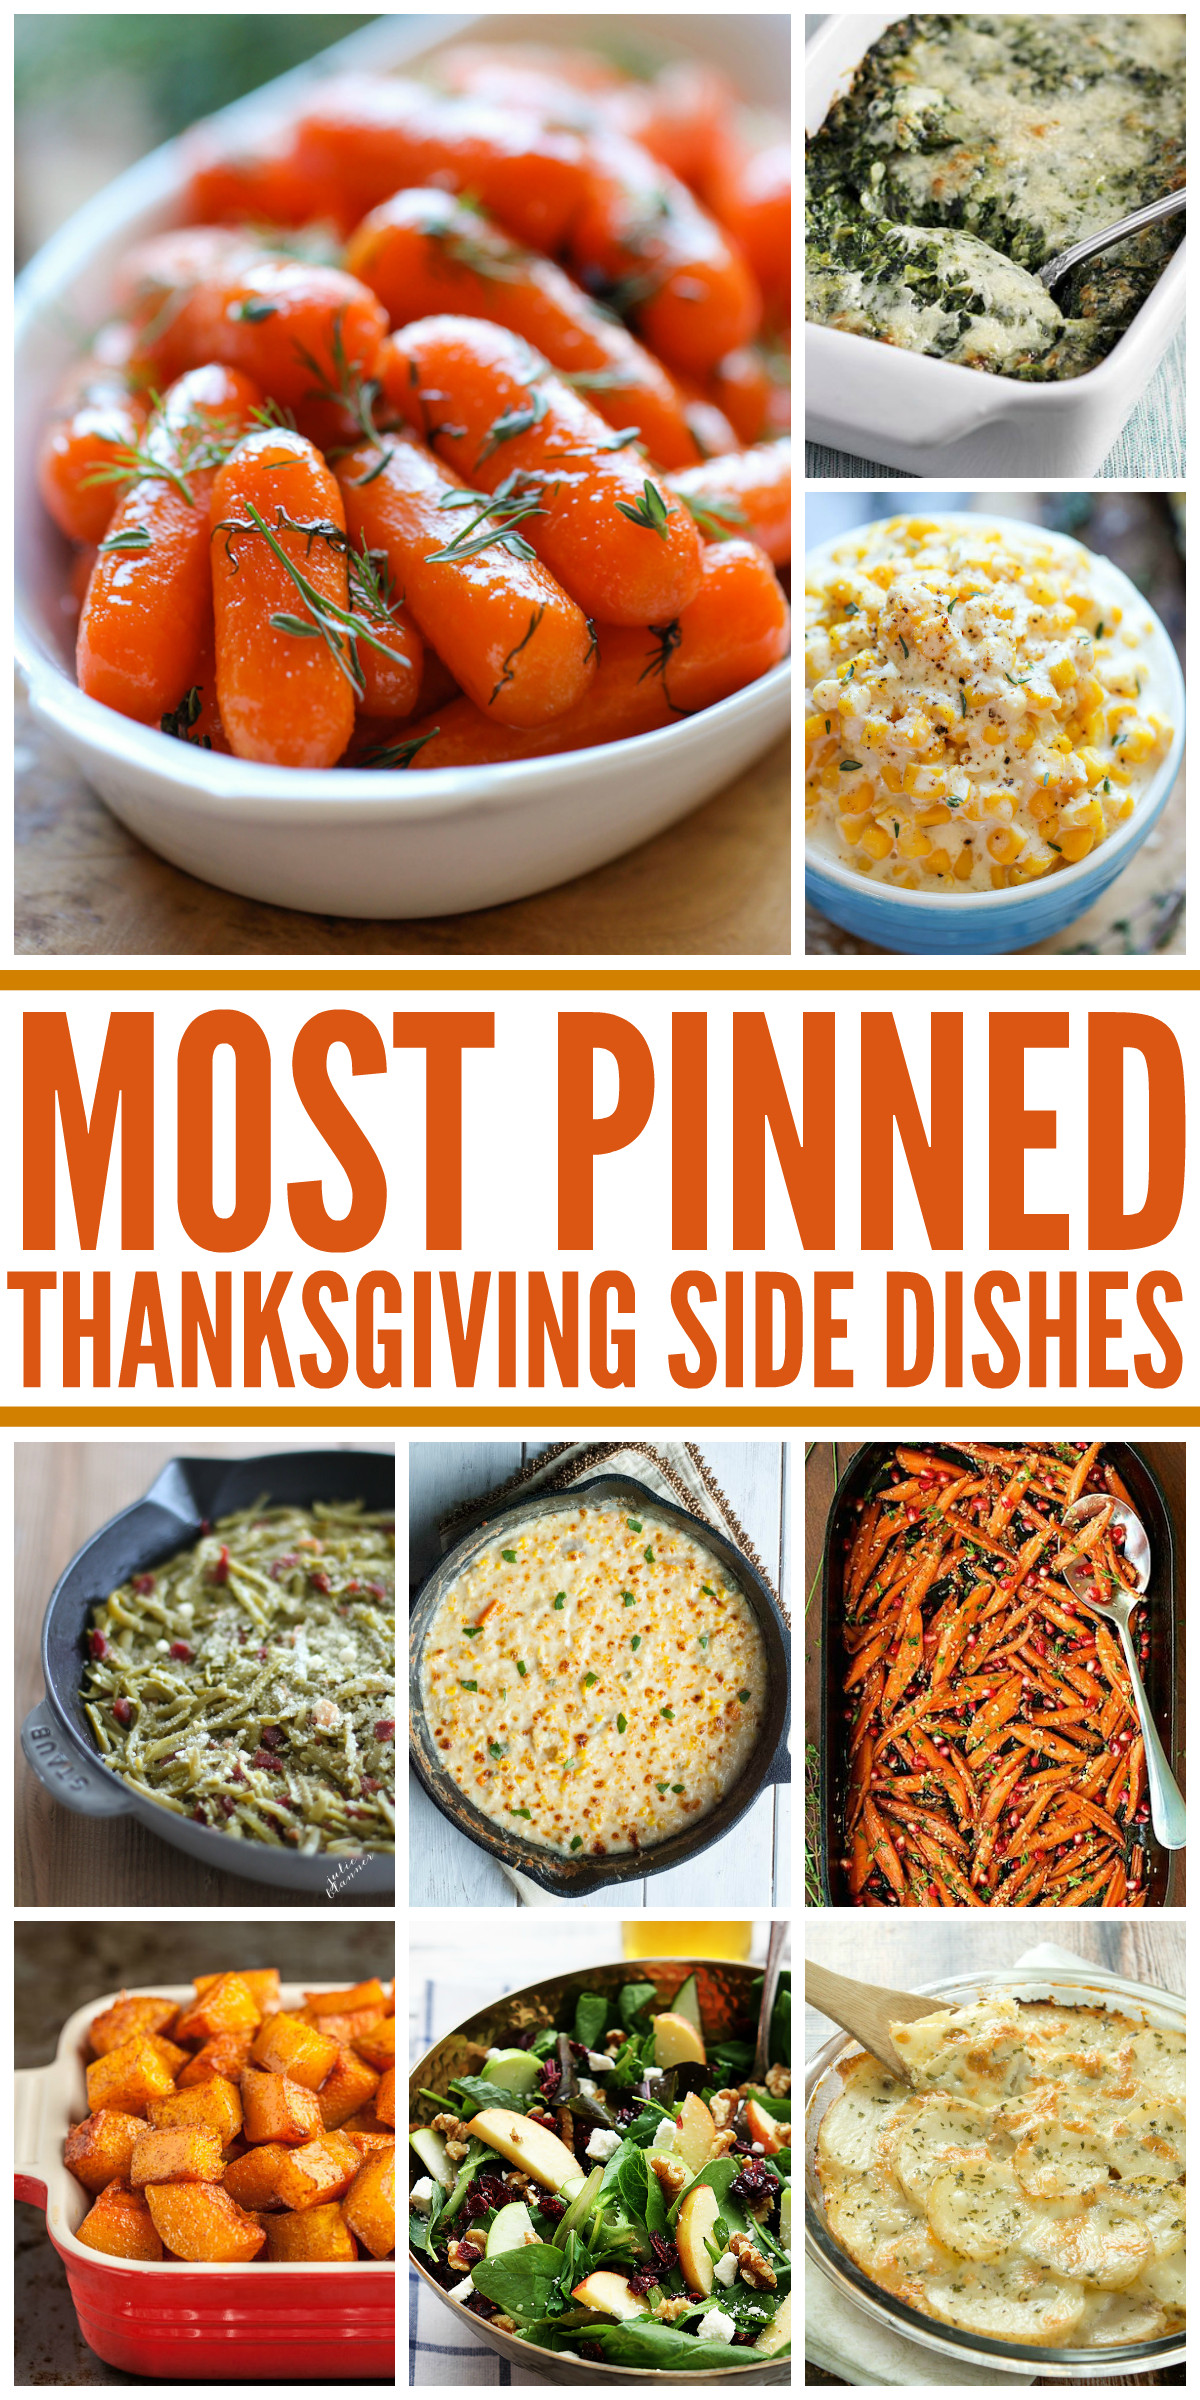 The Best Ideas for Dinner Sides Ideas - Best Recipes Ideas and Collections